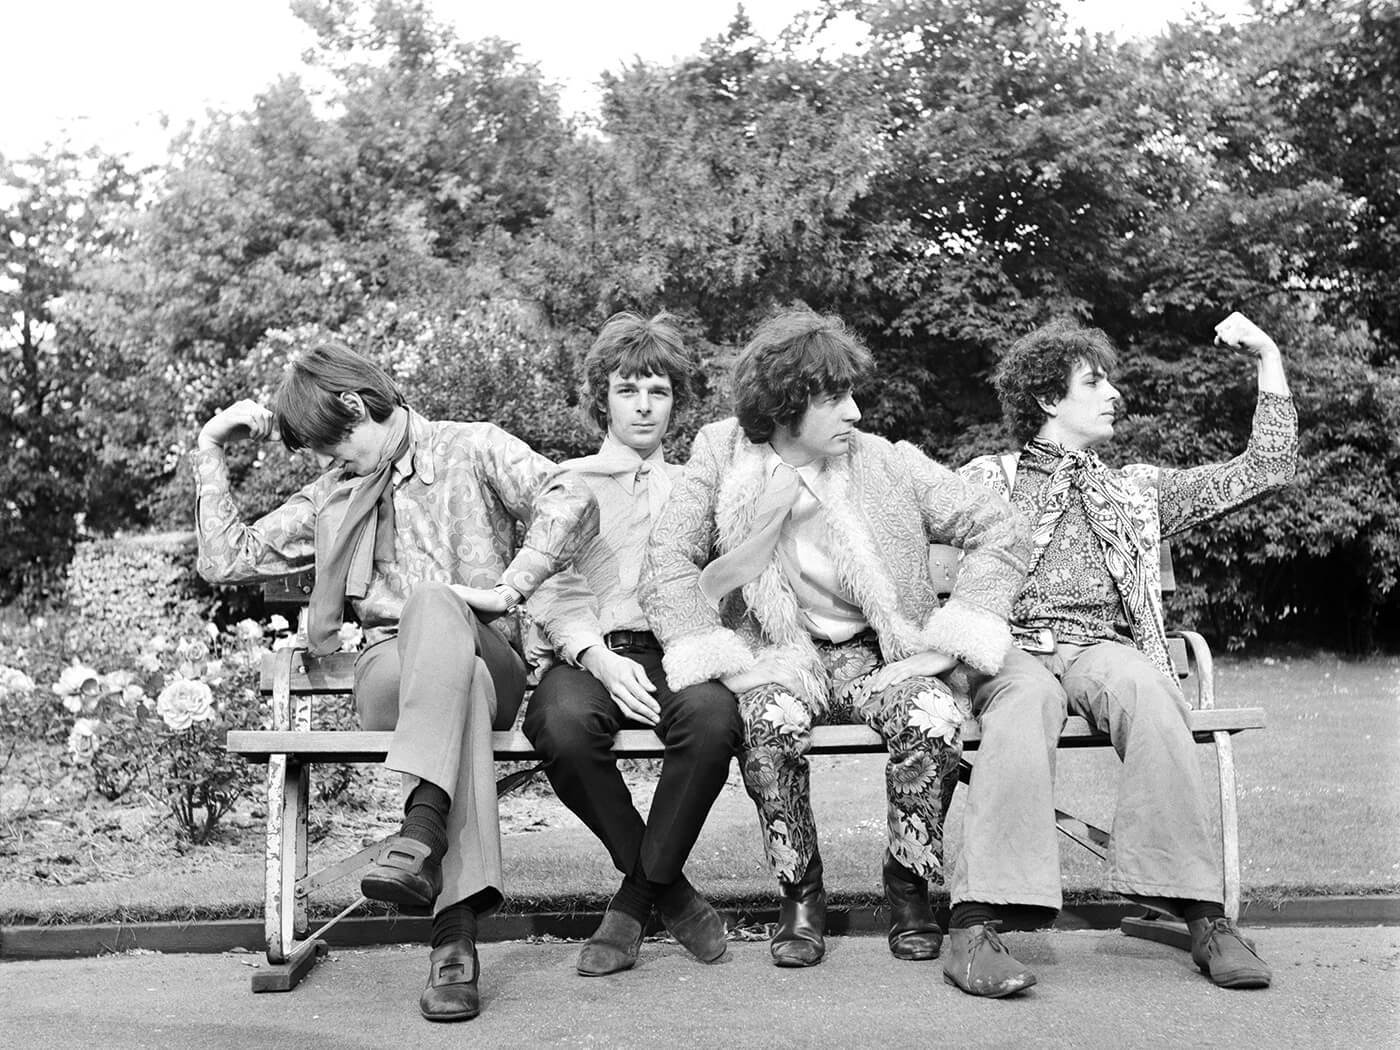 Have You Got It Yet? Some thoughts on Syd Barrett’s Pink Floyd and “the hip dream”